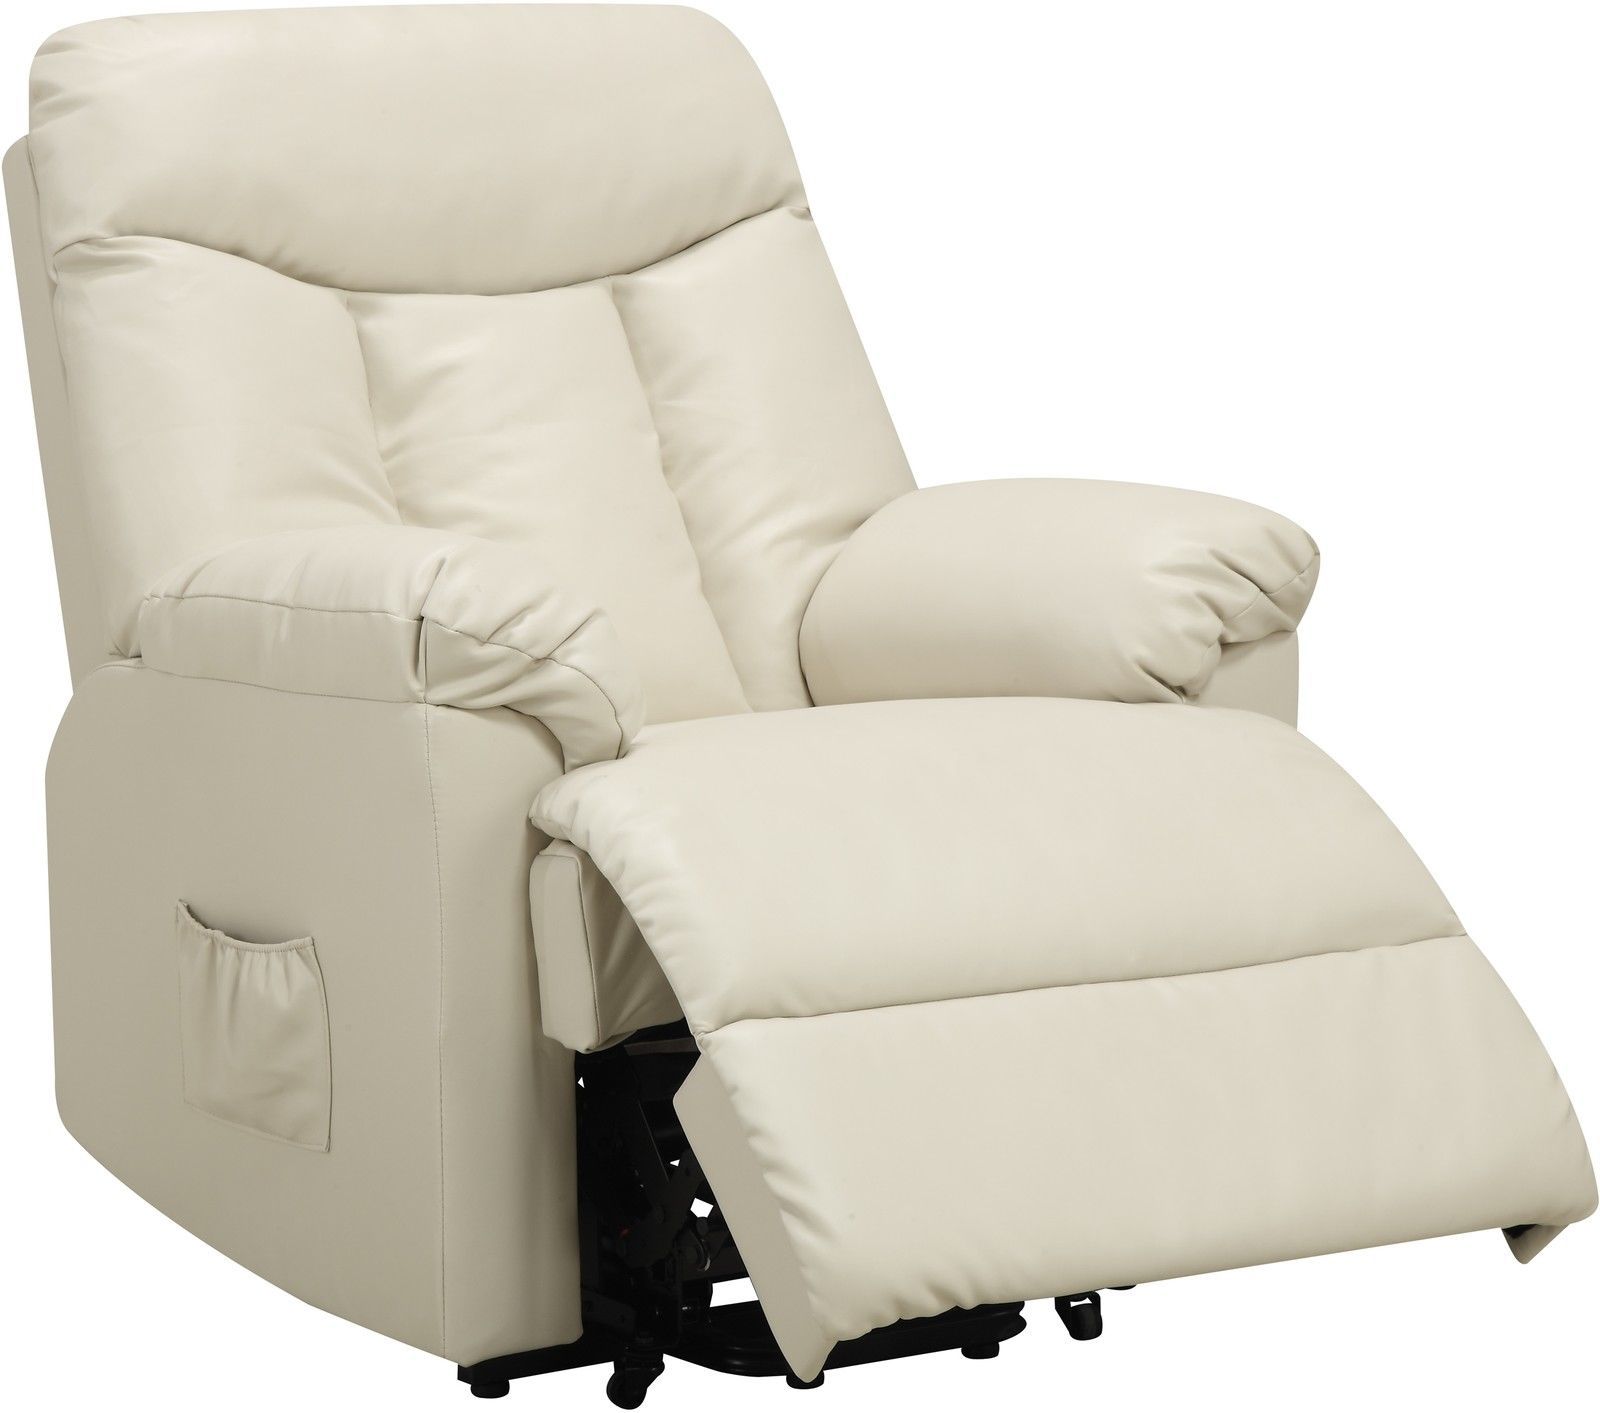 Electric Lift Chair Recliner Cream Leather Power Motion Lounge Seat ...